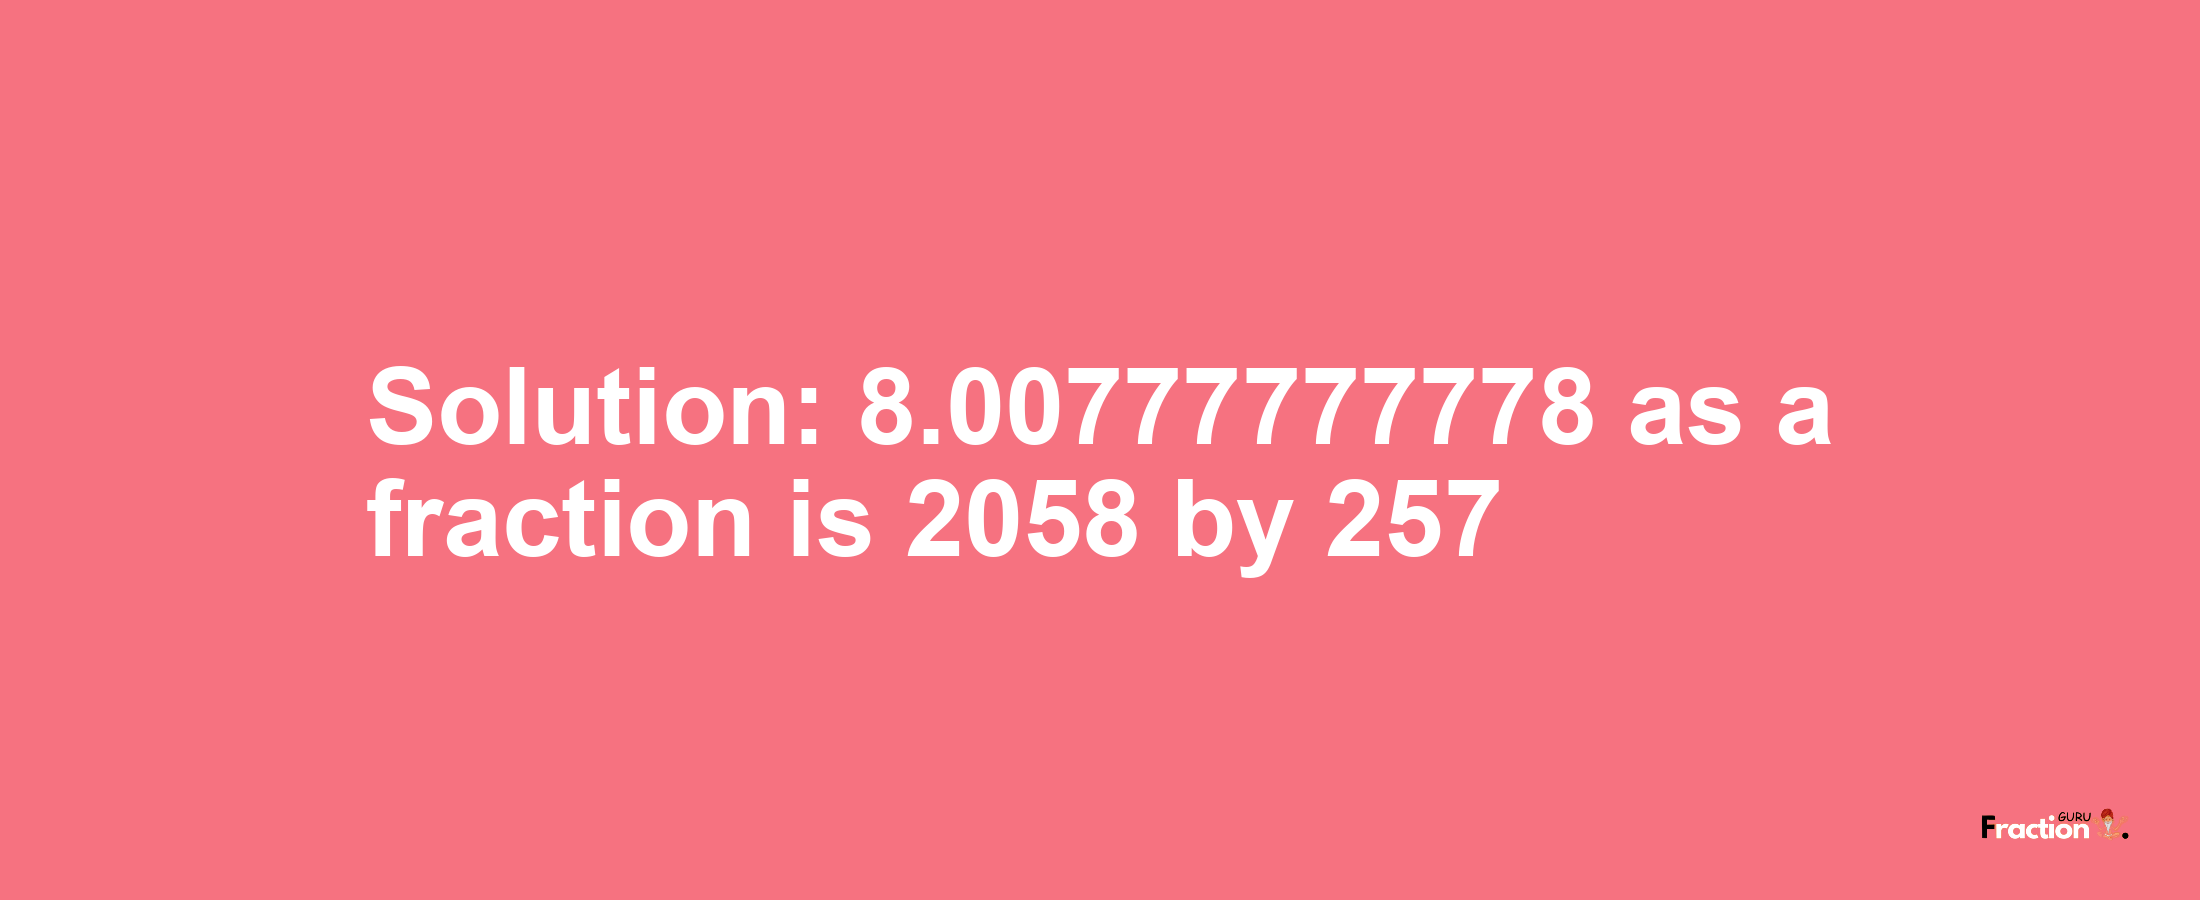 Solution:8.00777777778 as a fraction is 2058/257